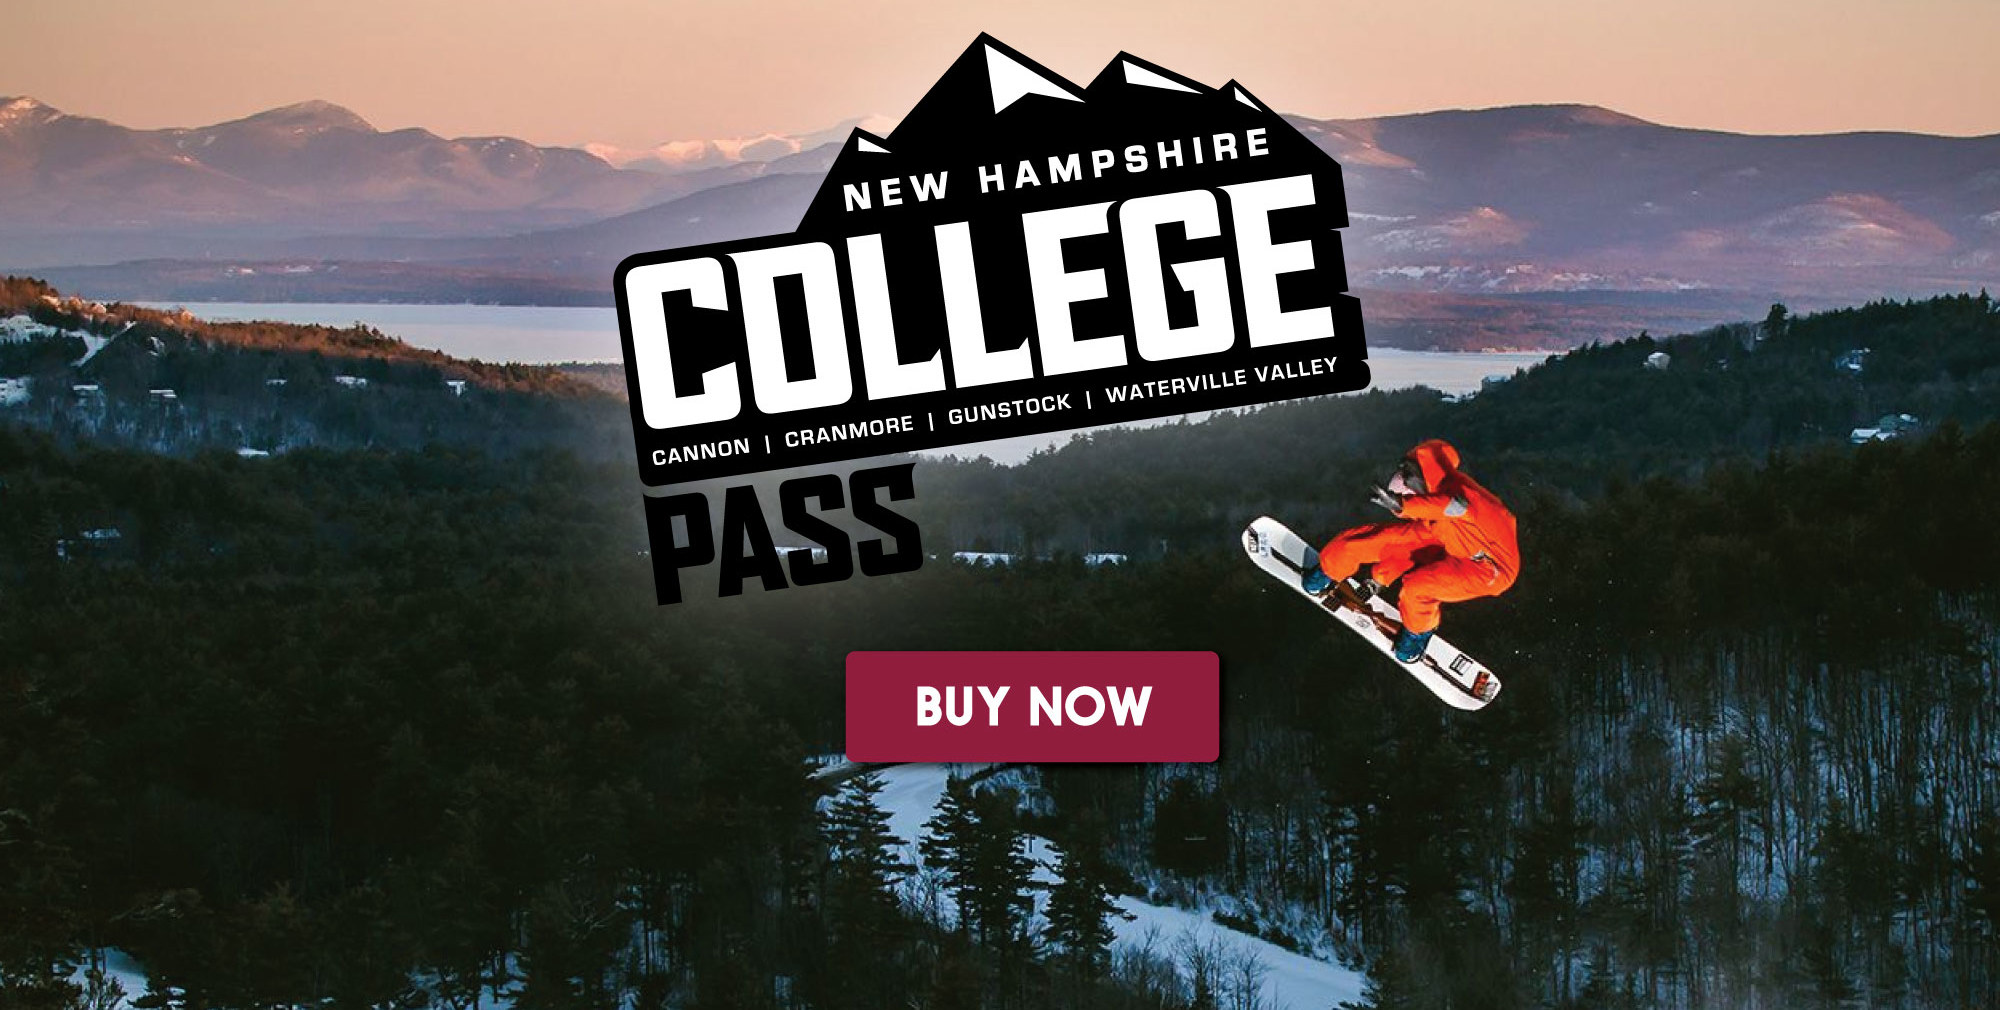 NH College Pass: Cannon, Cranmore, Gunstock, and Waterville Valley